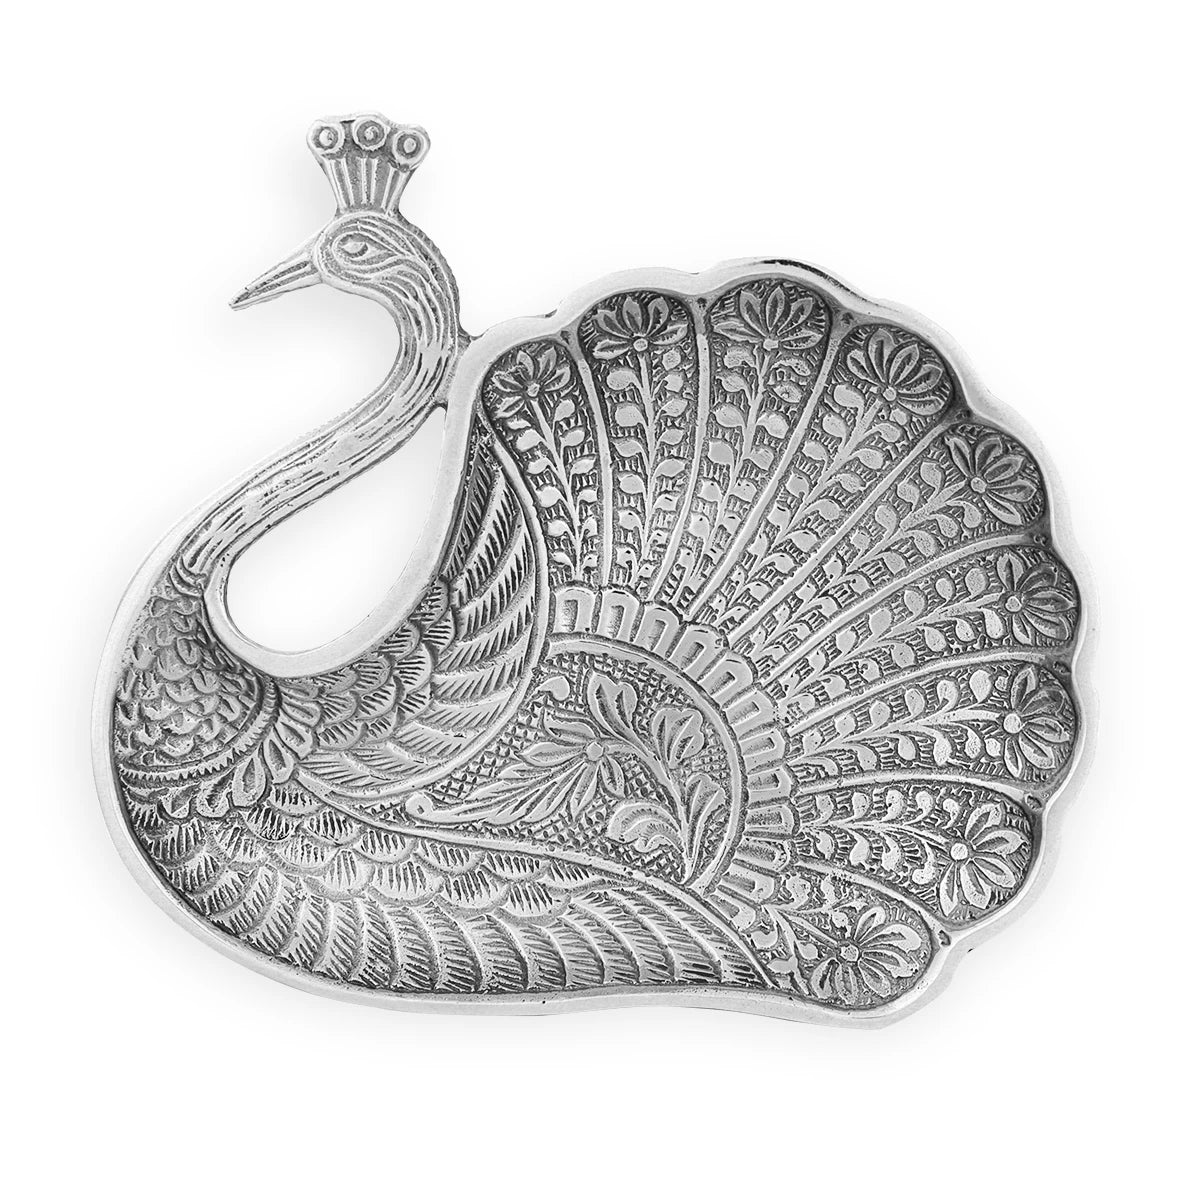 Peacock Shaped Serving Platter Handmade From Brass Metal With Handmade Floristic Engravings